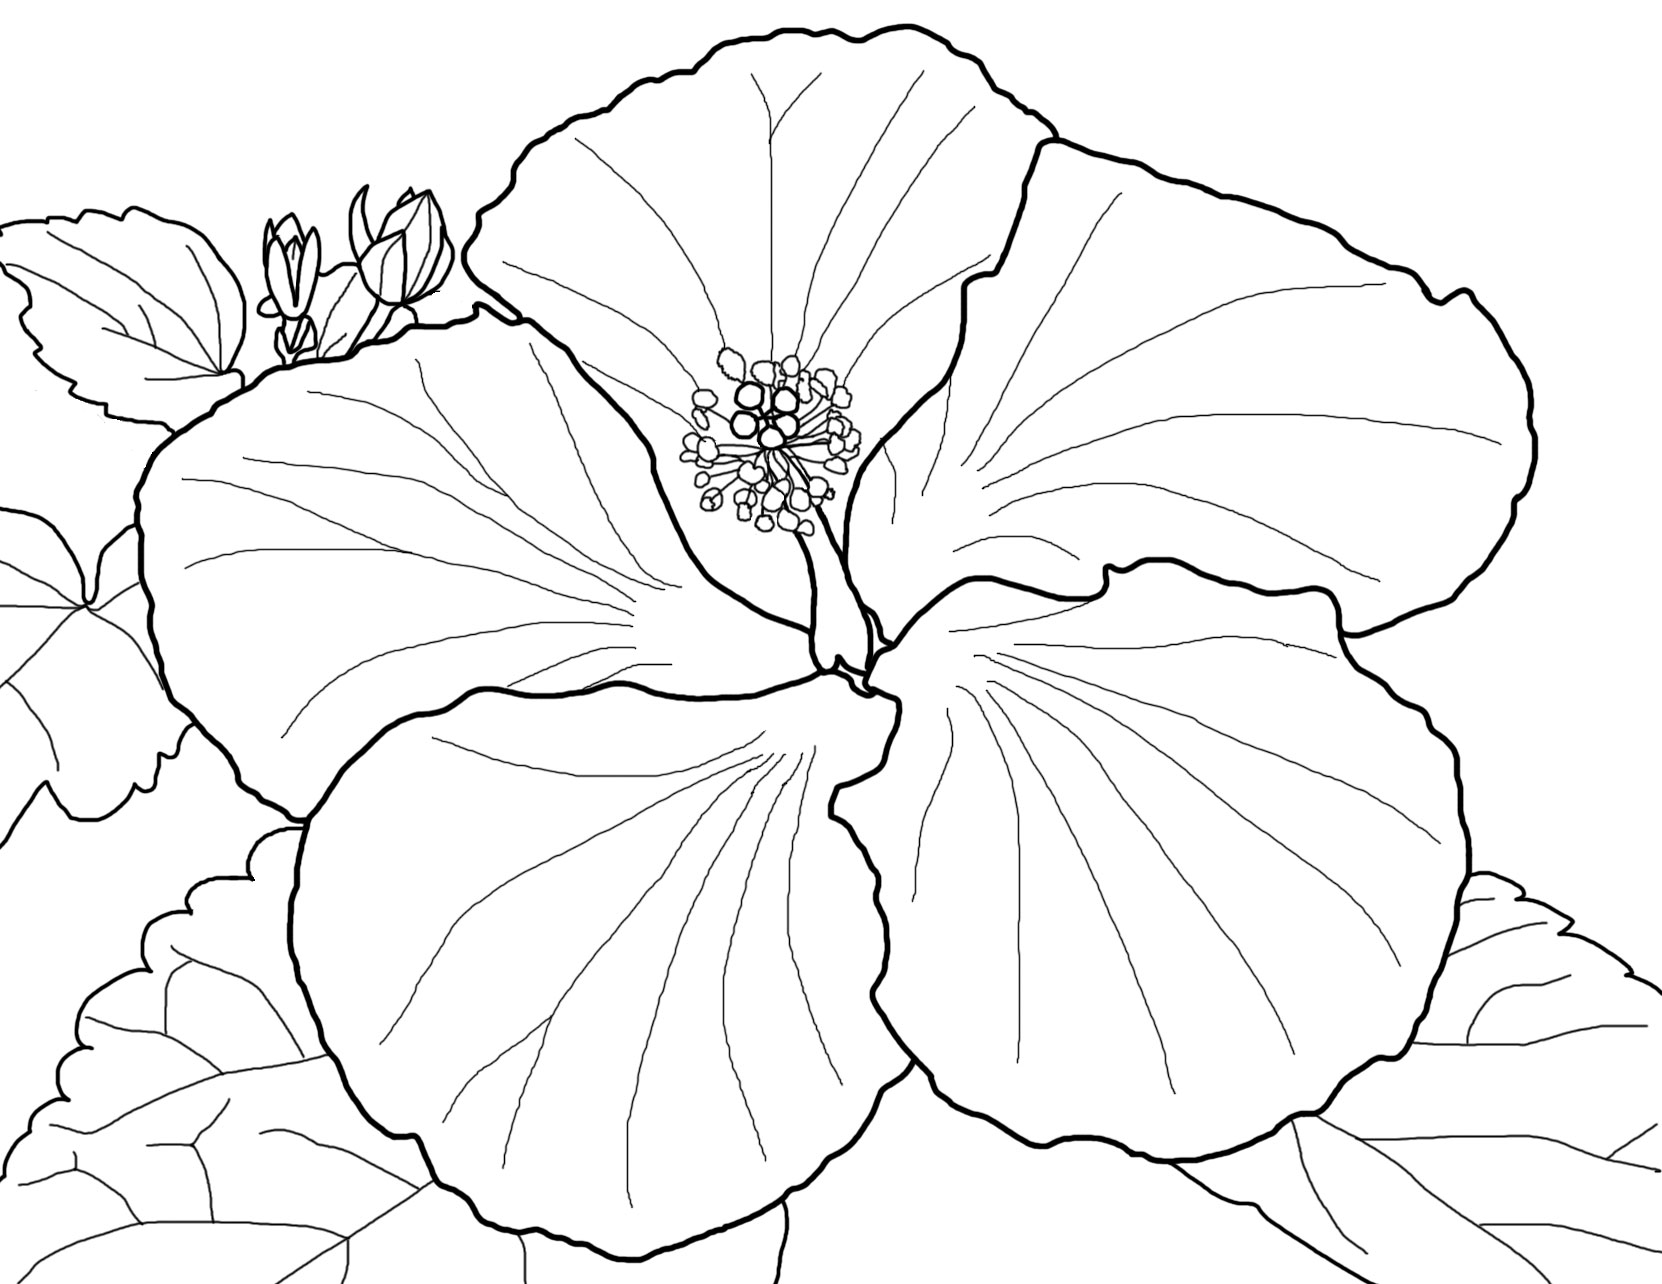 Spring Flowers Coloring Page: Beautiful Blossoms